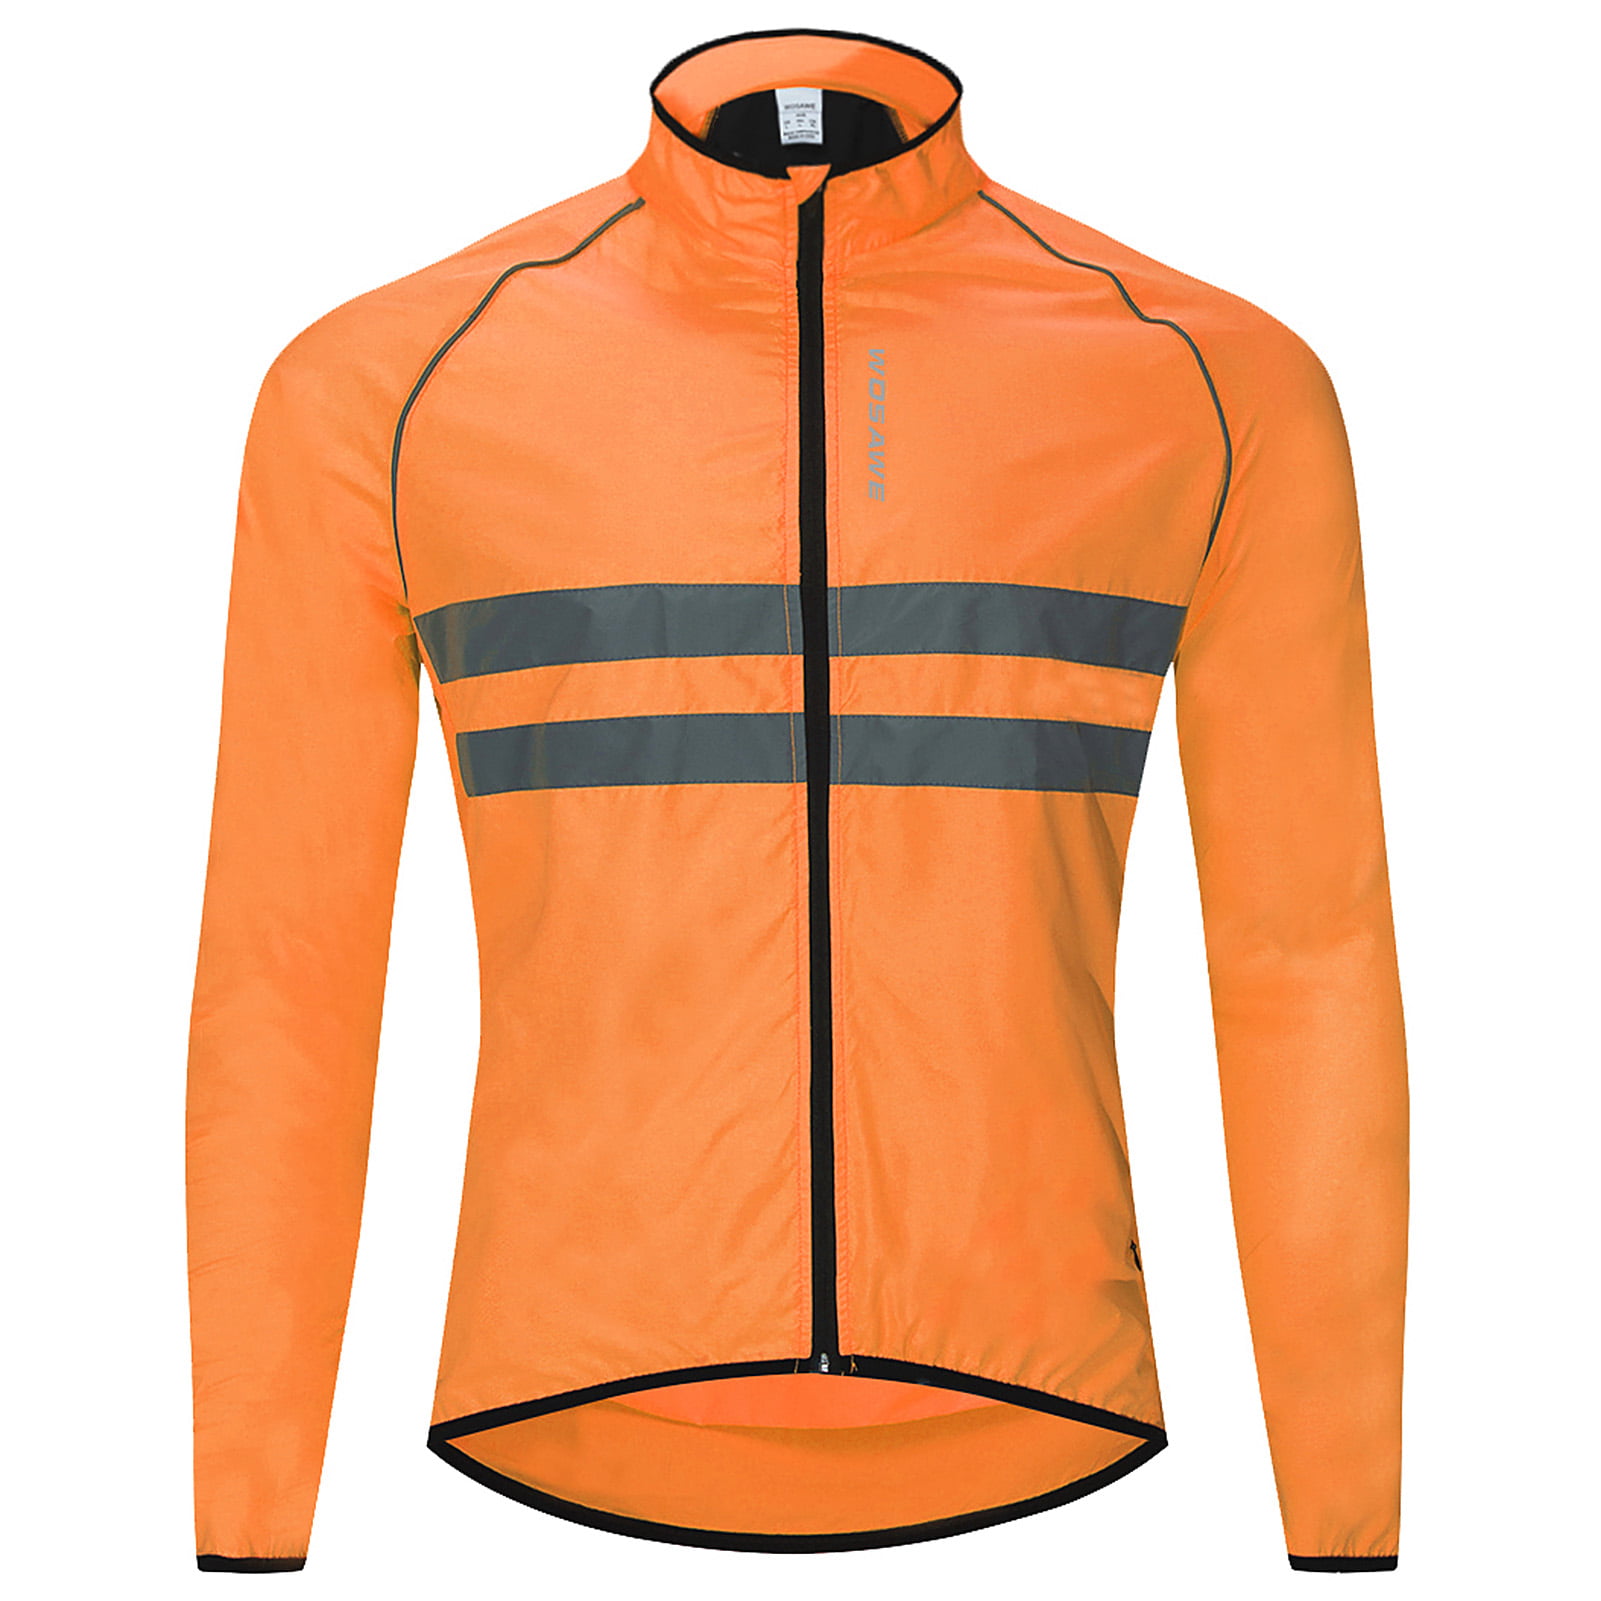 Mens Cycling Jacket Reflective Running Top Wind Coat Windproof Breathable Jersey 